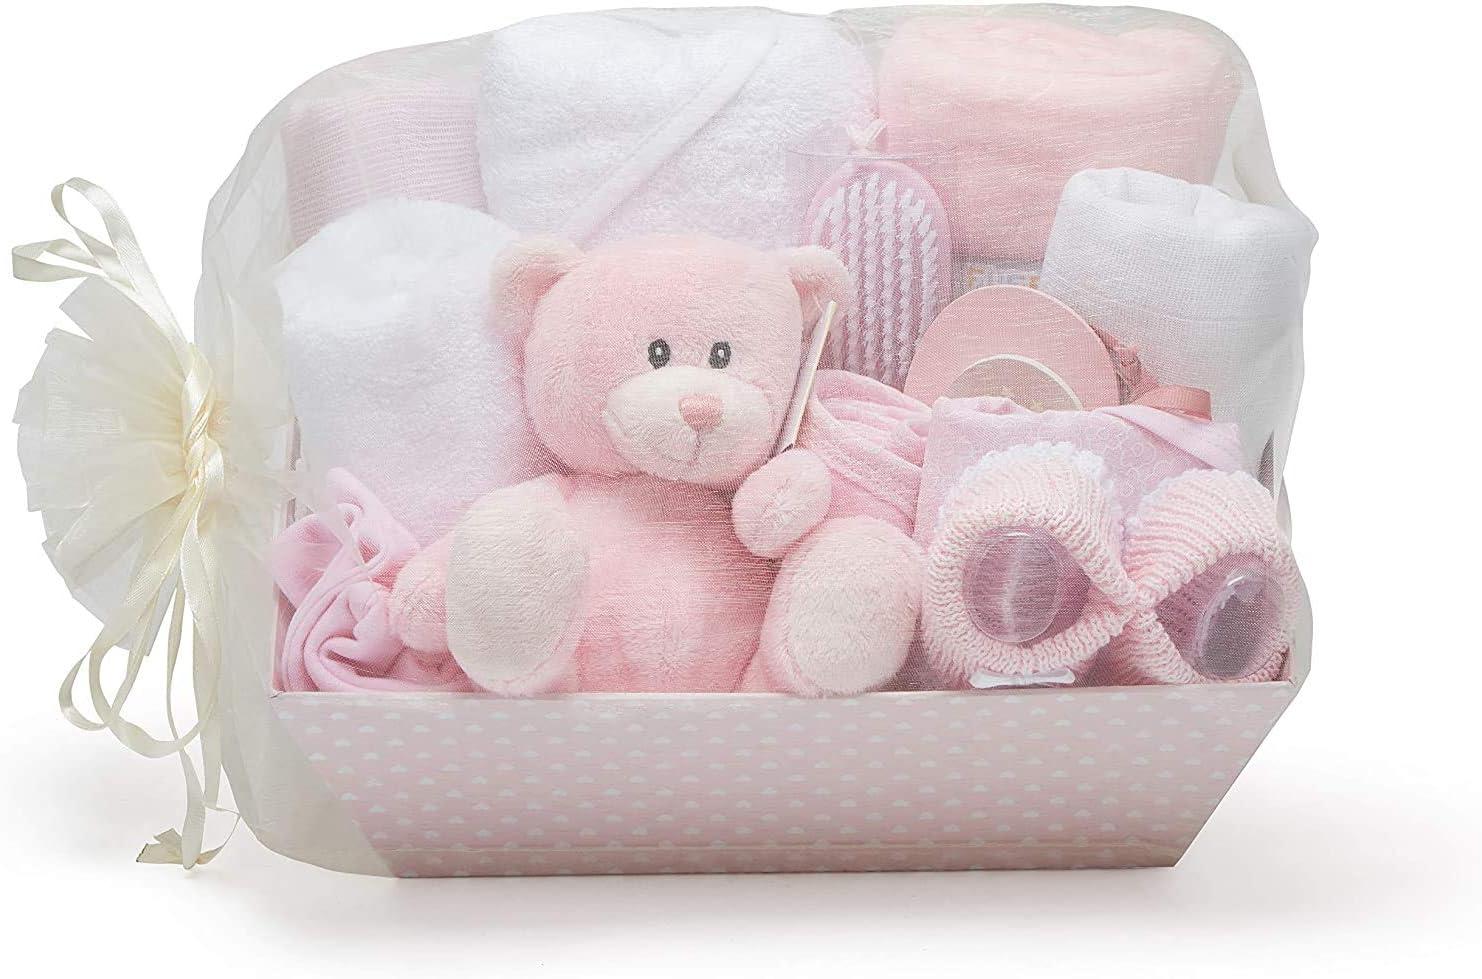 Buy our lamby love baby girl gift basket at broadwaybasketeers.com